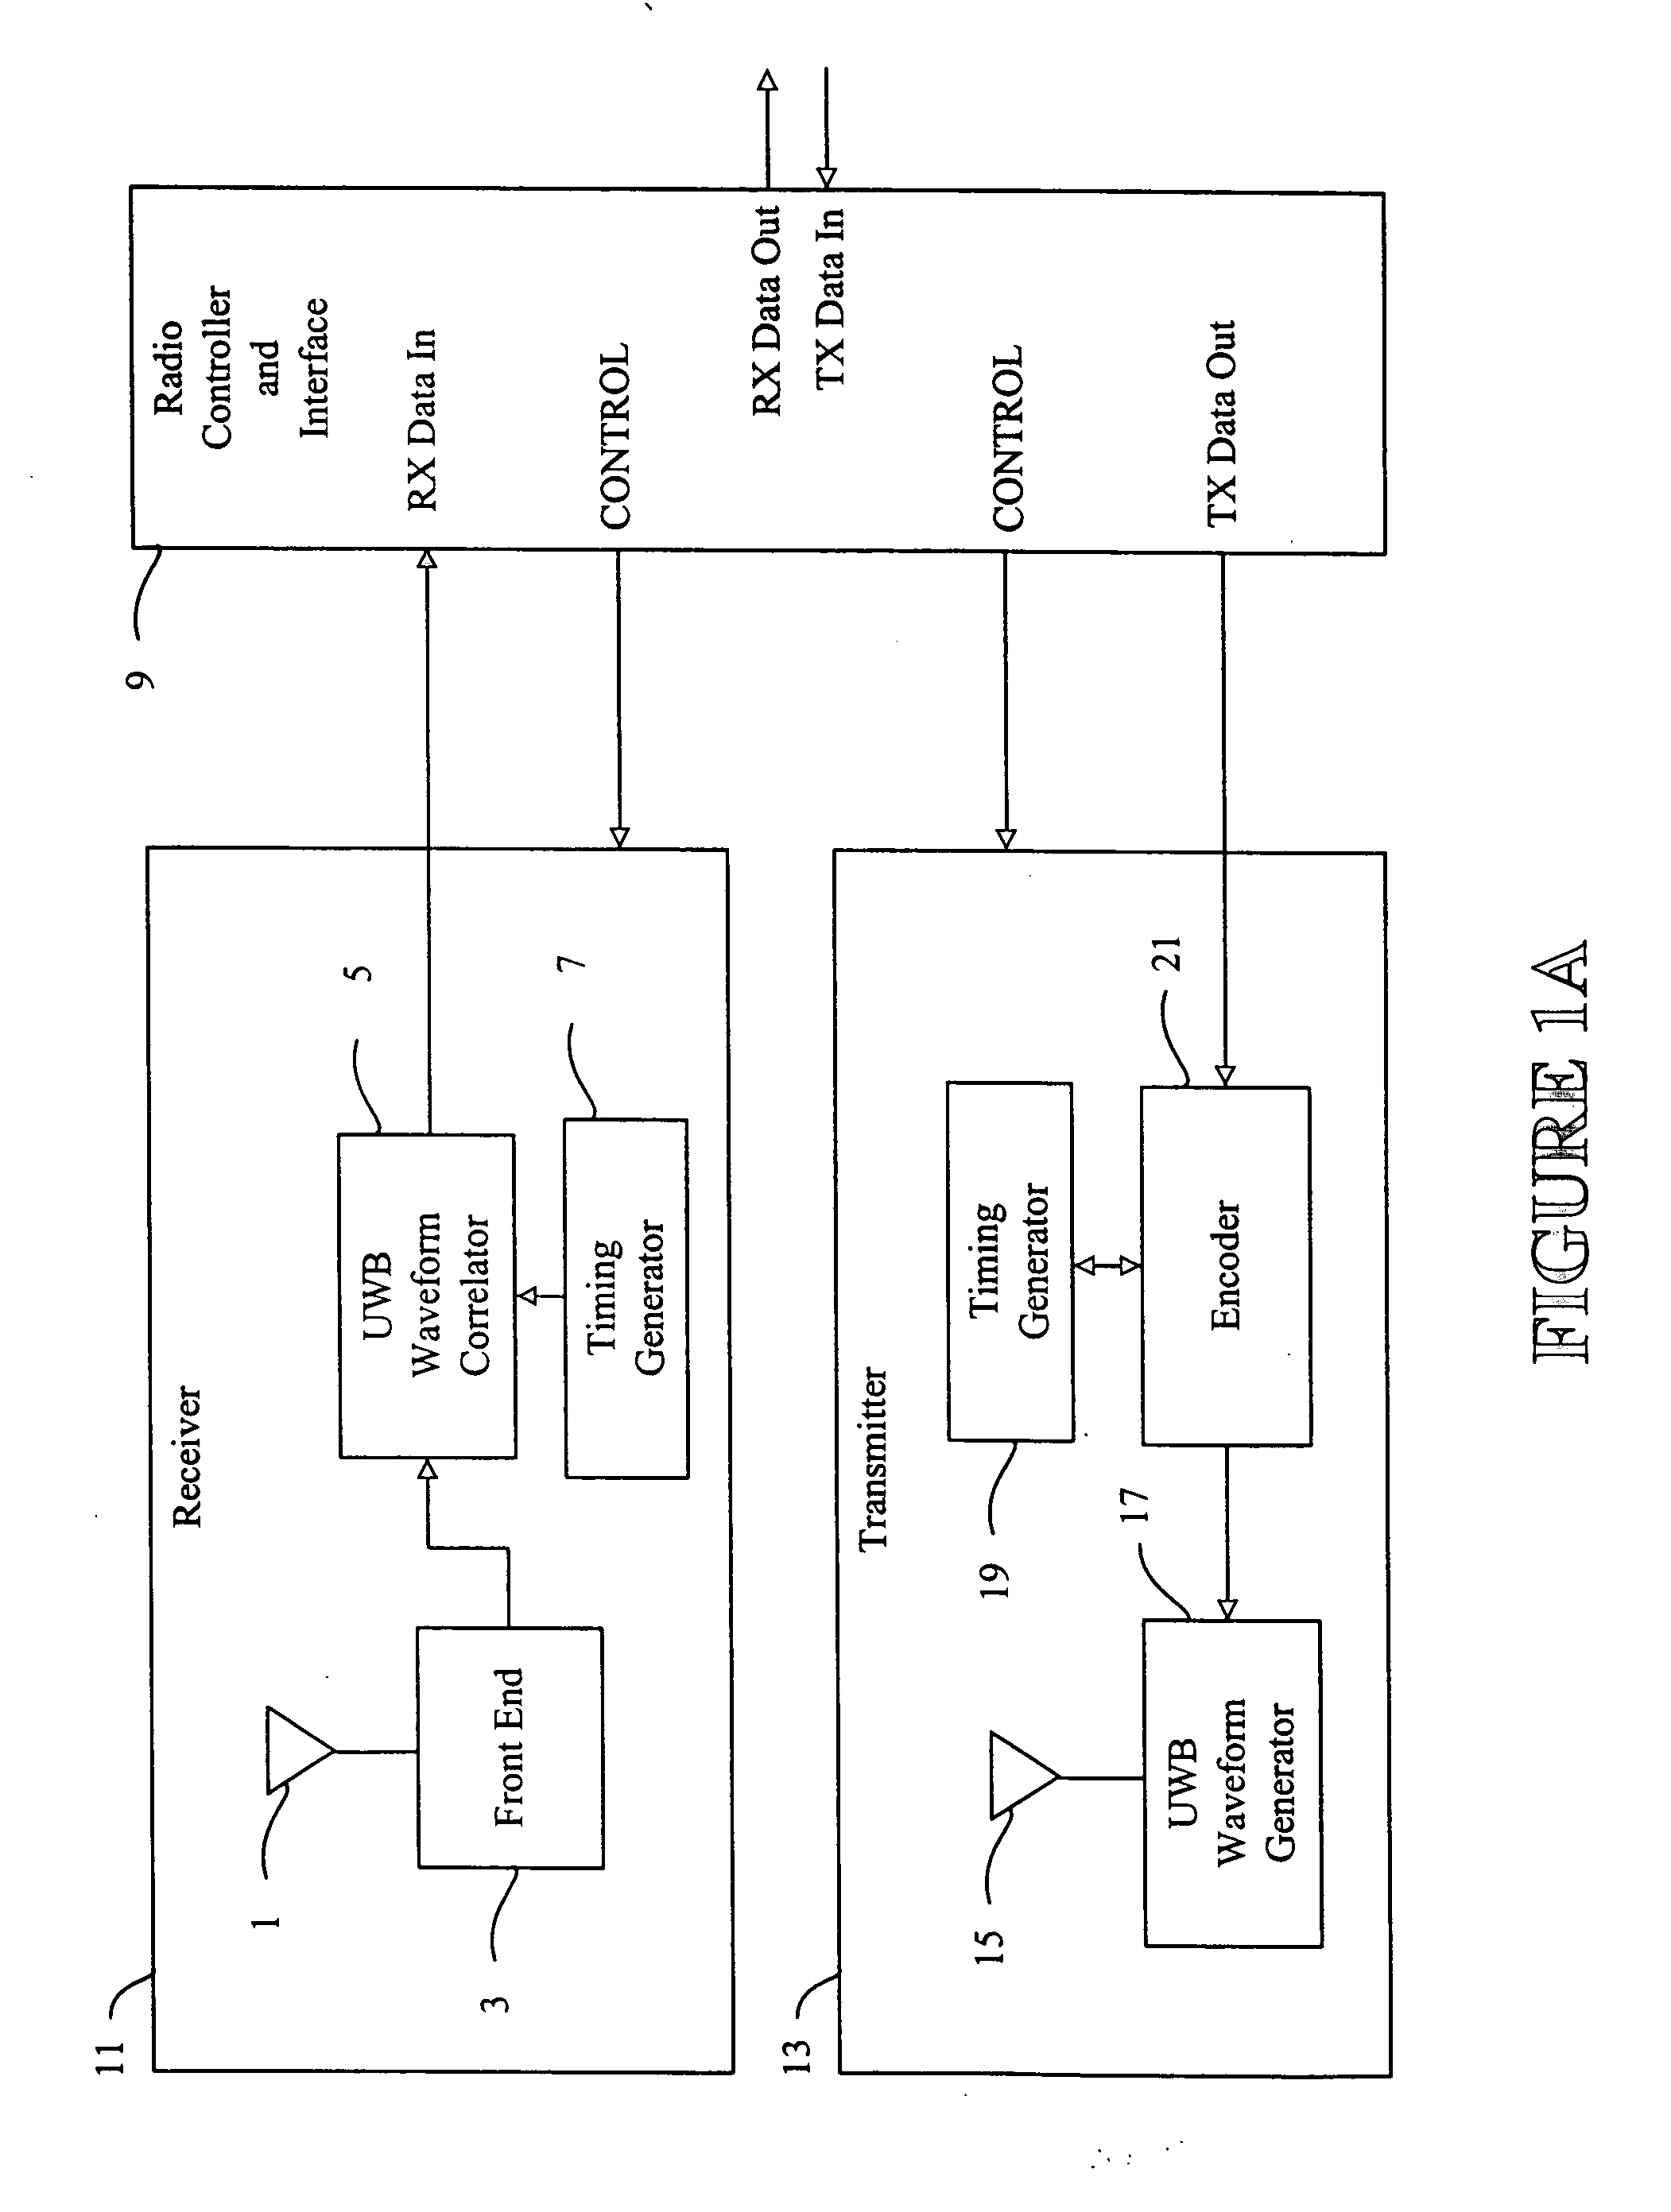 Method and system for enabling device functions based on distance information